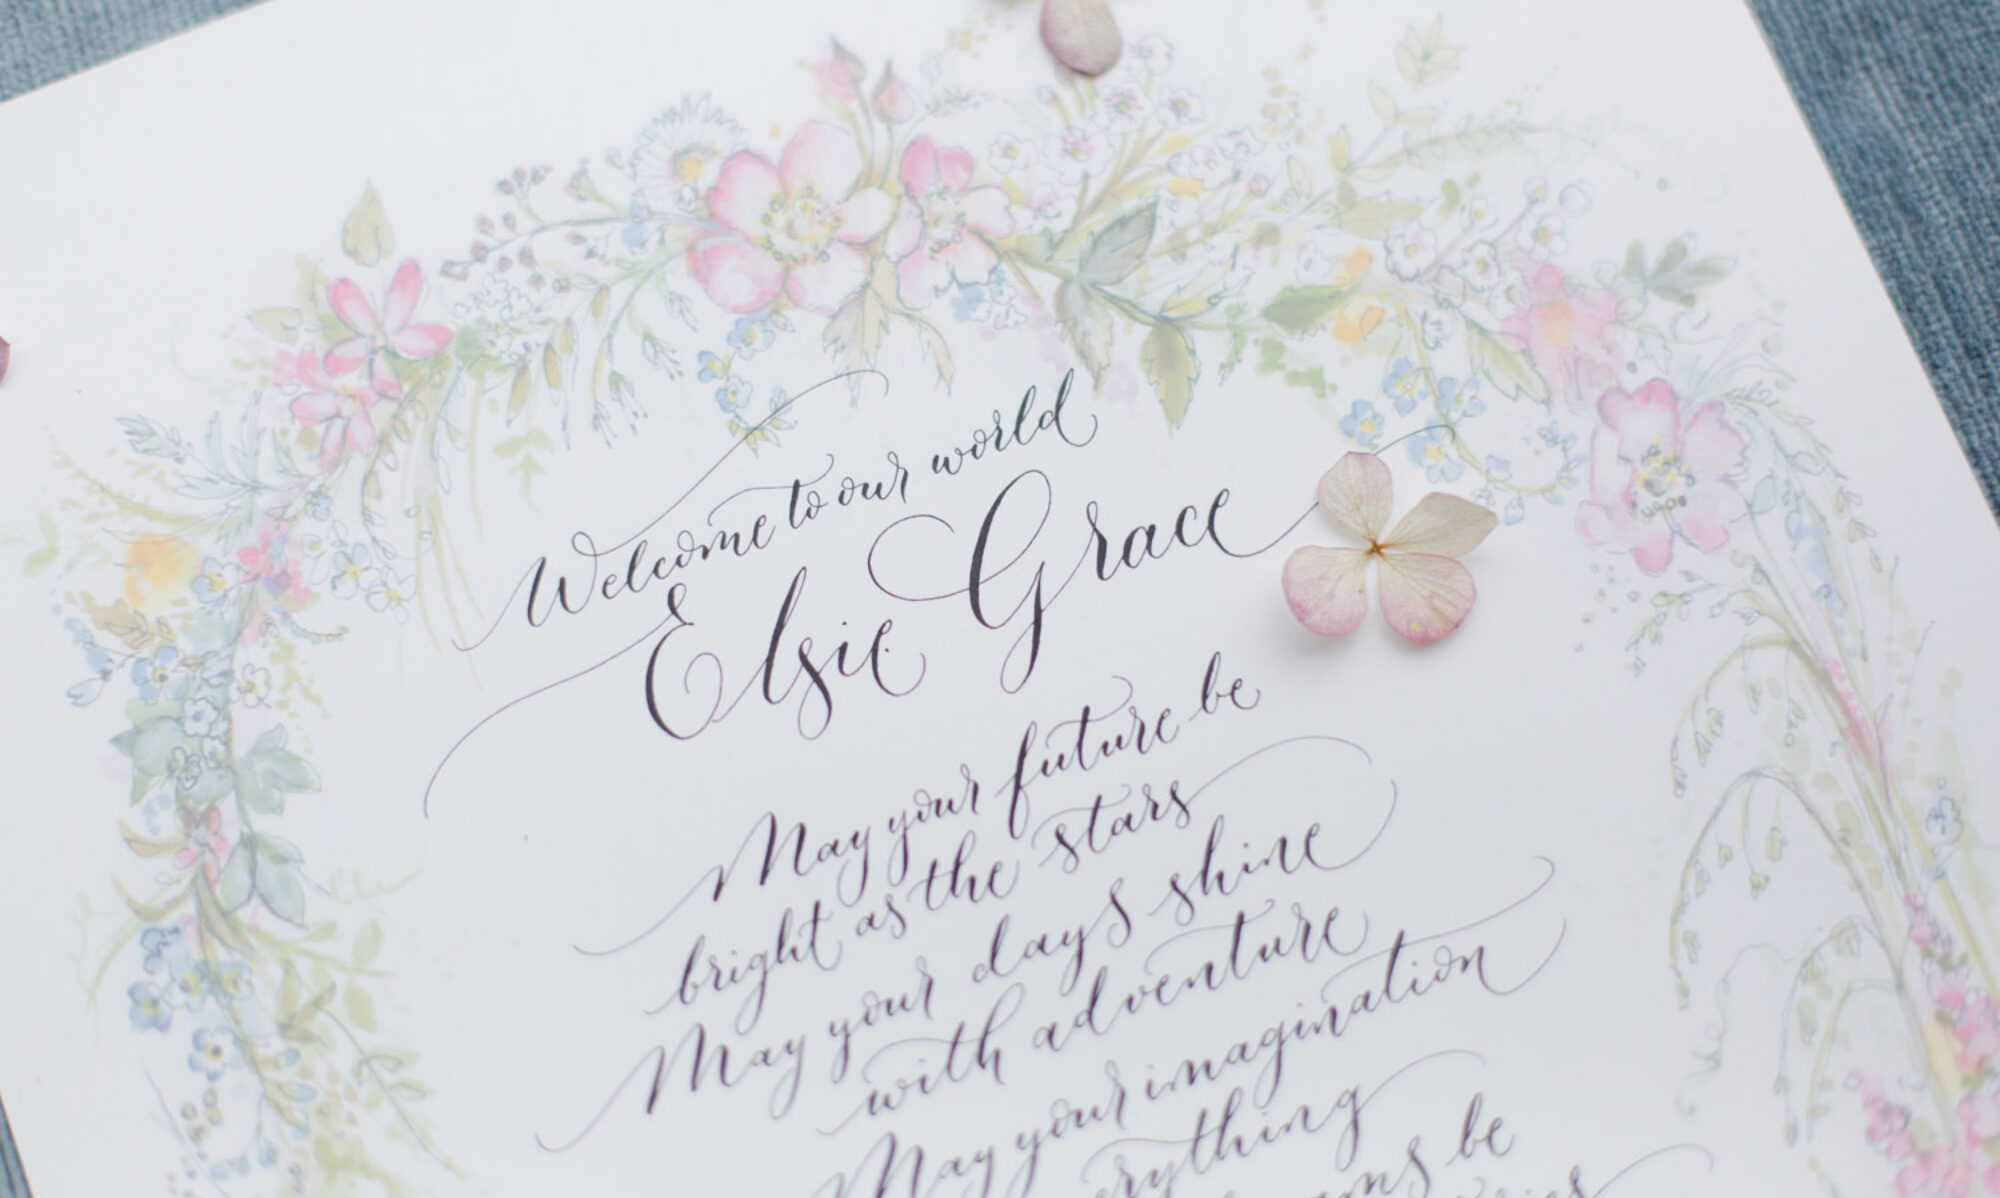 welcome to our world baby certificate in calligraphy, with floral border in pastel colours and hand calligraphy in the centre